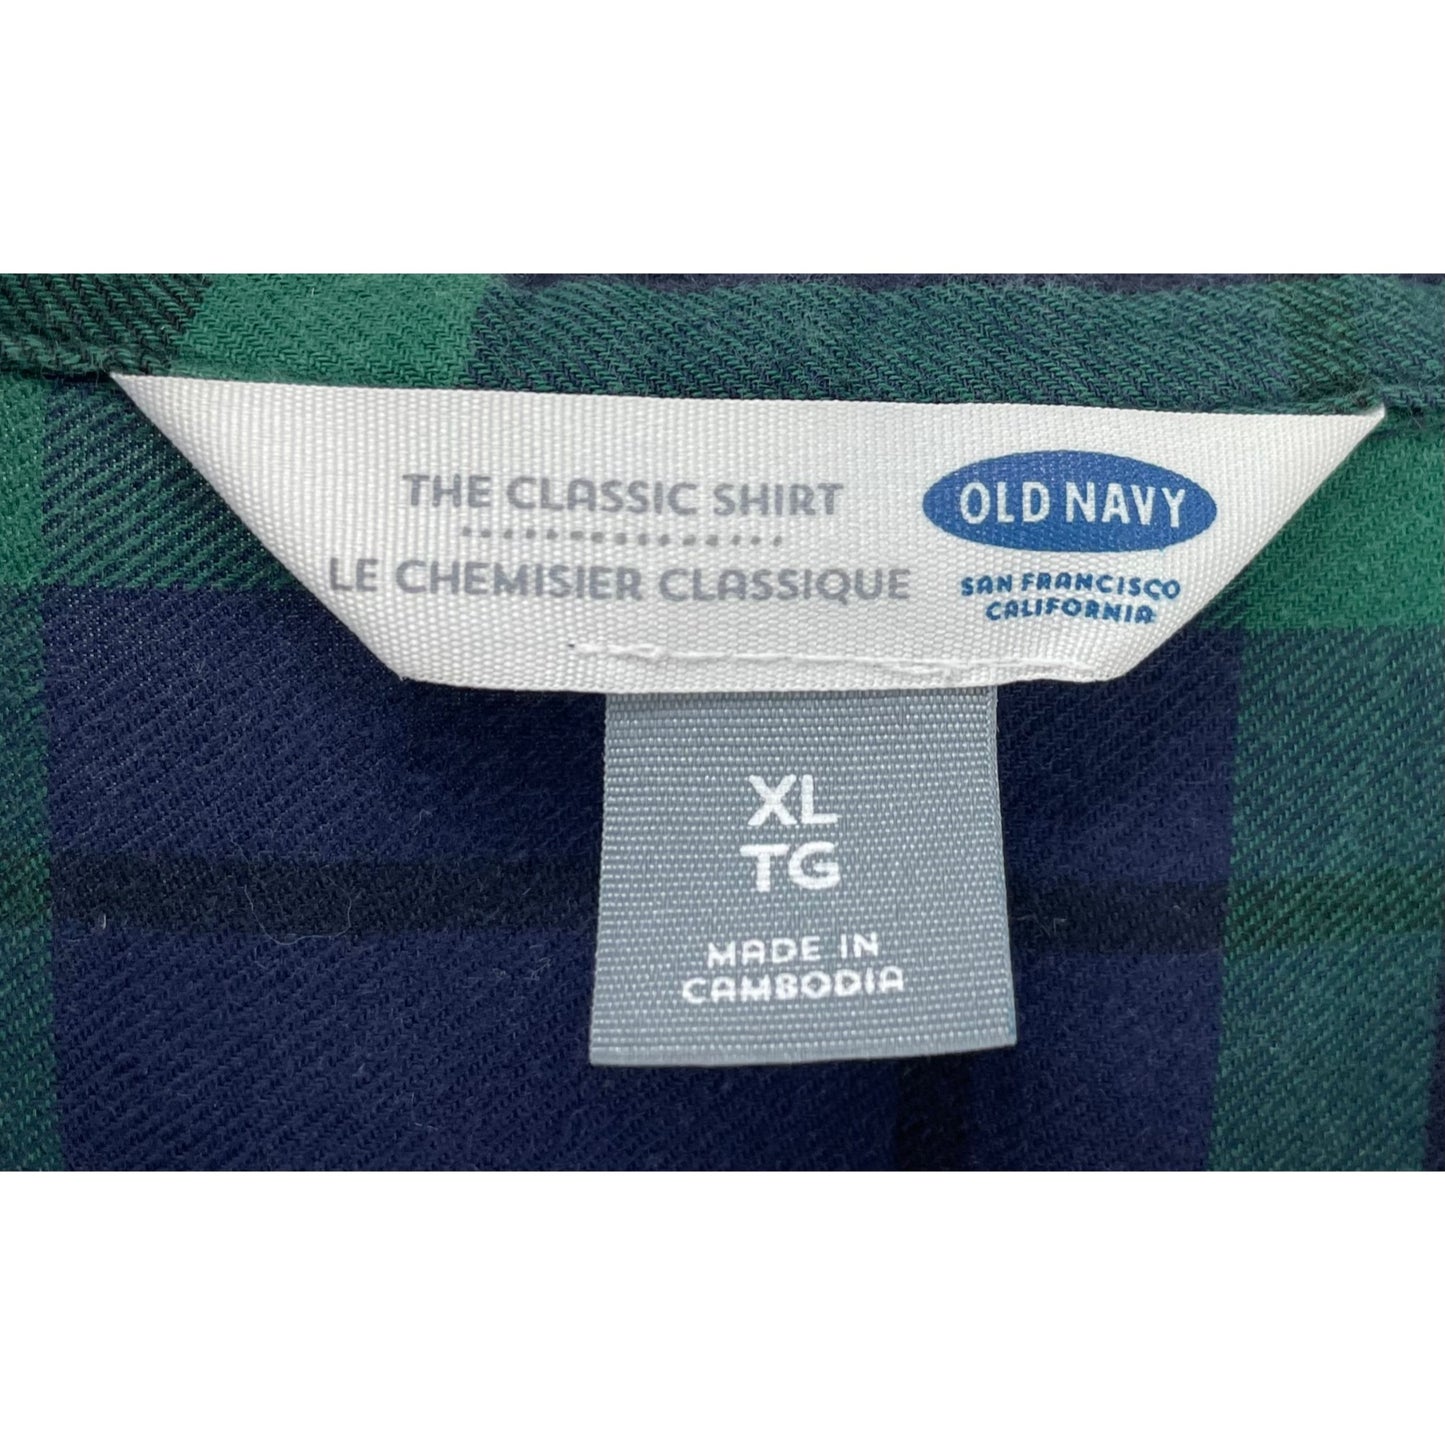 Old Navy Women’s XL Flannel Plaid Navy & Forest Green Button-Down Top